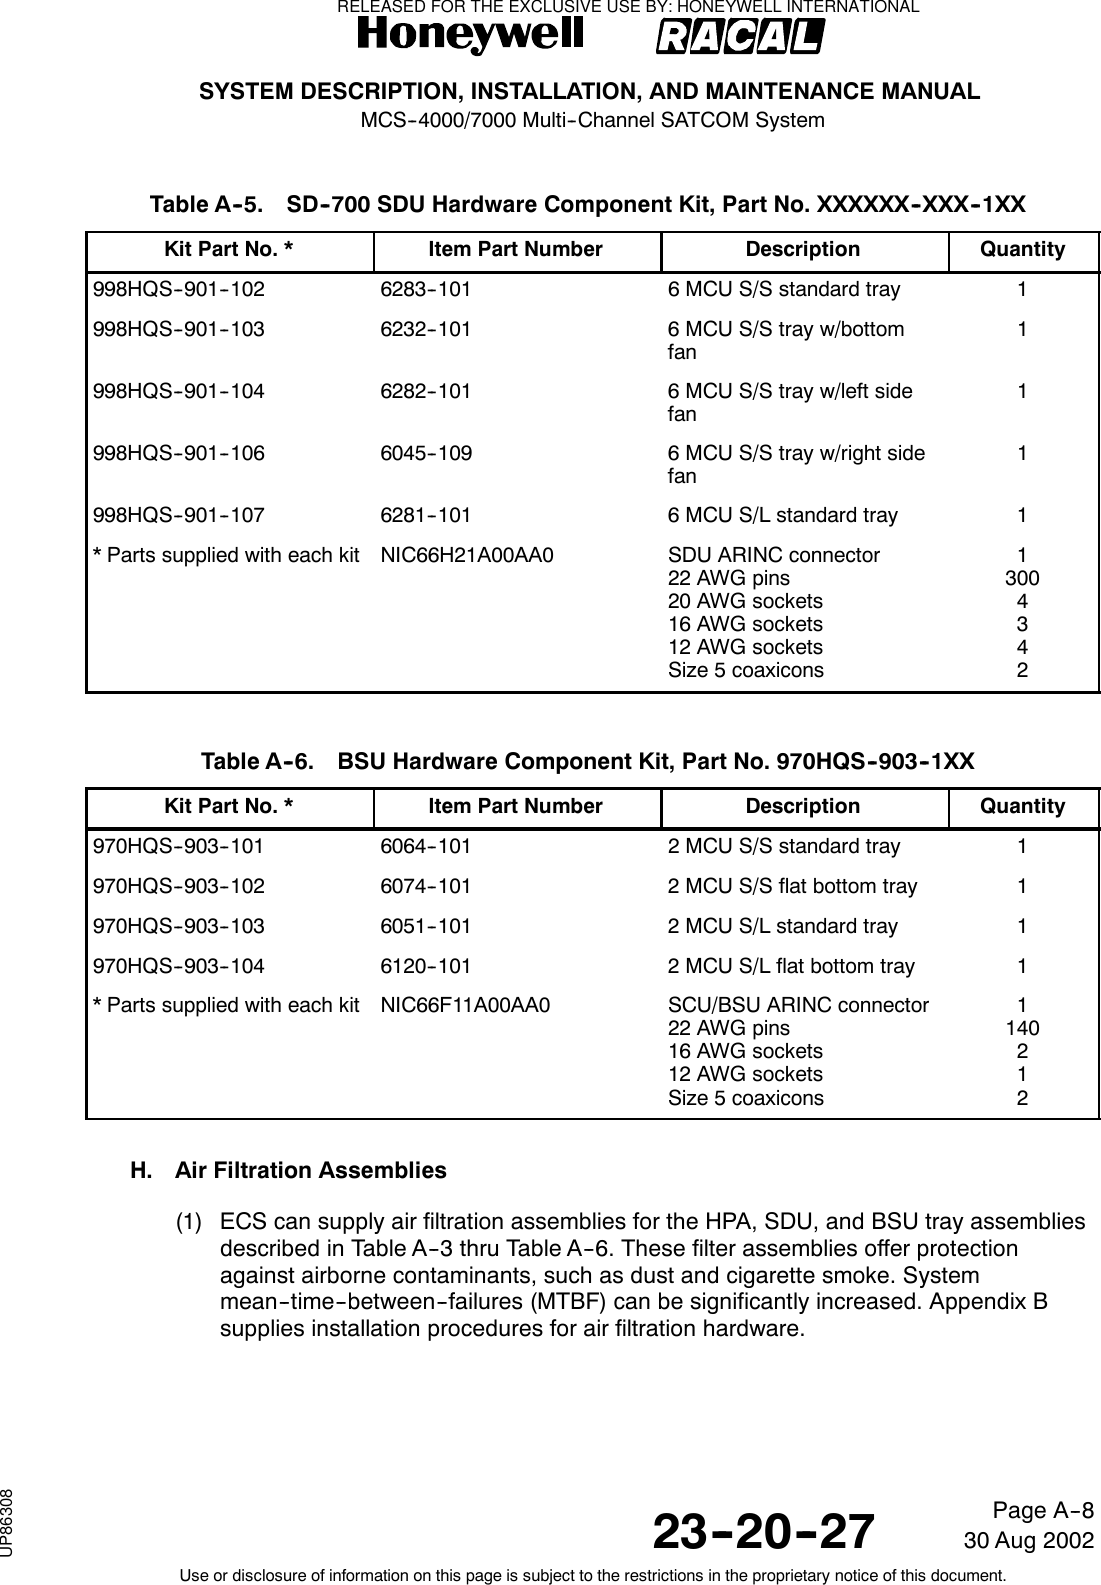 SYSTEM DESCRIPTION, INSTALLATION, AND MAINTENANCE MANUALMCS--4000/7000 Multi--Channel SATCOM System23--20--2730 Aug 2002Use or disclosure of information on this page is subject to the restrictions in the proprietary notice of this document.Page A--8Table A--5. SD--700 SDU Hardware Component Kit, Part No. XXXXXX--XXX--1XXKit Part No. * Item Part Number Description Quantity998HQS--901--102 6283--101 6 MCU S/S standard tray 1998HQS--901--103 6232--101 6 MCU S/S tray w/bottomfan1998HQS--901--104 6282--101 6 MCU S/S tray w/left sidefan1998HQS--901--106 6045--109 6 MCU S/S tray w/right sidefan1998HQS--901--107 6281--101 6 MCU S/L standard tray 1* Parts supplied with each kit NIC66H21A00AA0 SDU ARINC connector22 AWG pins20 AWG sockets16 AWG sockets12 AWG socketsSize 5 coaxicons13004342Table A--6. BSU Hardware Component Kit, Part No. 970HQS--903--1XXKit Part No. * Item Part Number Description Quantity970HQS--903--101 6064--101 2 MCU S/S standard tray 1970HQS--903--102 6074--101 2 MCU S/S flat bottom tray 1970HQS--903--103 6051--101 2 MCU S/L standard tray 1970HQS--903--104 6120--101 2 MCU S/L flat bottom tray 1* Parts supplied with each kit NIC66F11A00AA0 SCU/BSU ARINC connector22 AWG pins16 AWG sockets12 AWG socketsSize 5 coaxicons1140212H. Air Filtration Assemblies(1) ECS can supply air filtration assemblies for the HPA, SDU, and BSU tray assembliesdescribed in Table A--3 thru Table A--6. These filter assemblies offer protectionagainst airborne contaminants, such as dust and cigarette smoke. Systemmean--time--between--failures (MTBF) can be significantly increased. Appendix Bsupplies installation procedures for air filtration hardware.RELEASED FOR THE EXCLUSIVE USE BY: HONEYWELL INTERNATIONALUP86308